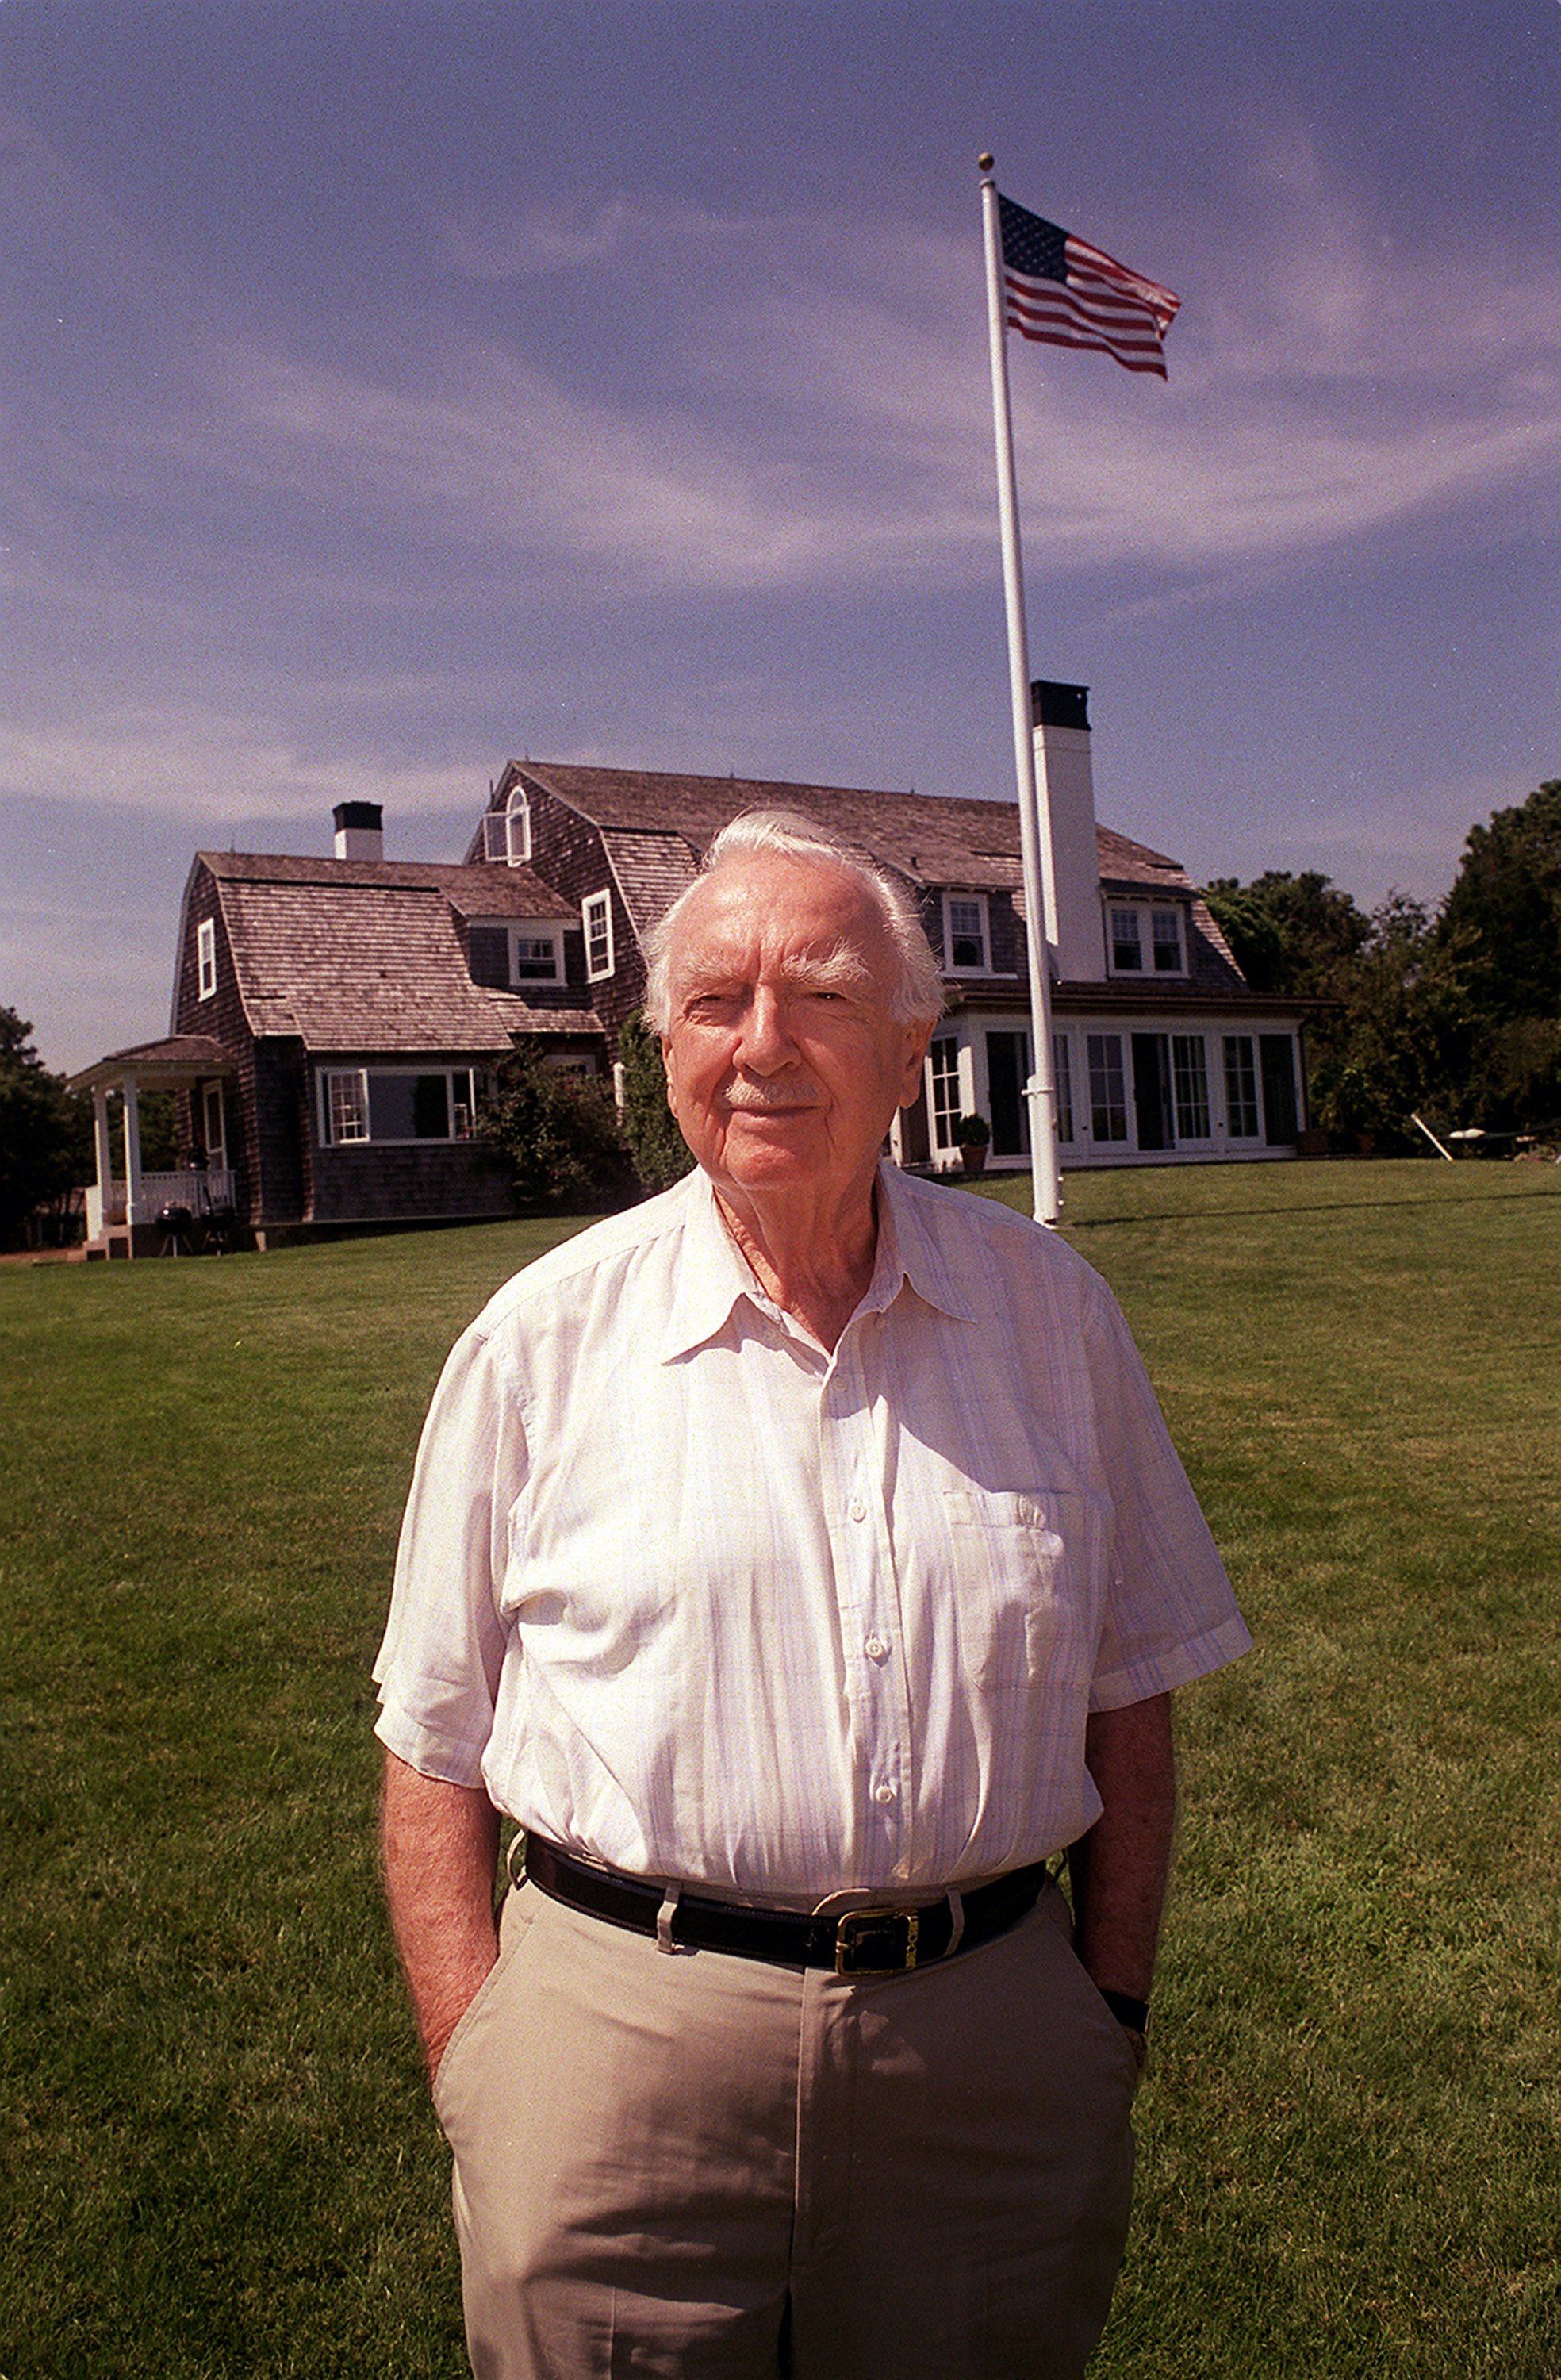 Walter Cronkite poses in front of his home August 29, 2003 in Edgartown, Massachusetts. News anchorman Walter Cronkite died at the age of 92 on July 17, 2009 at his home in New York. | Source: Getty Images